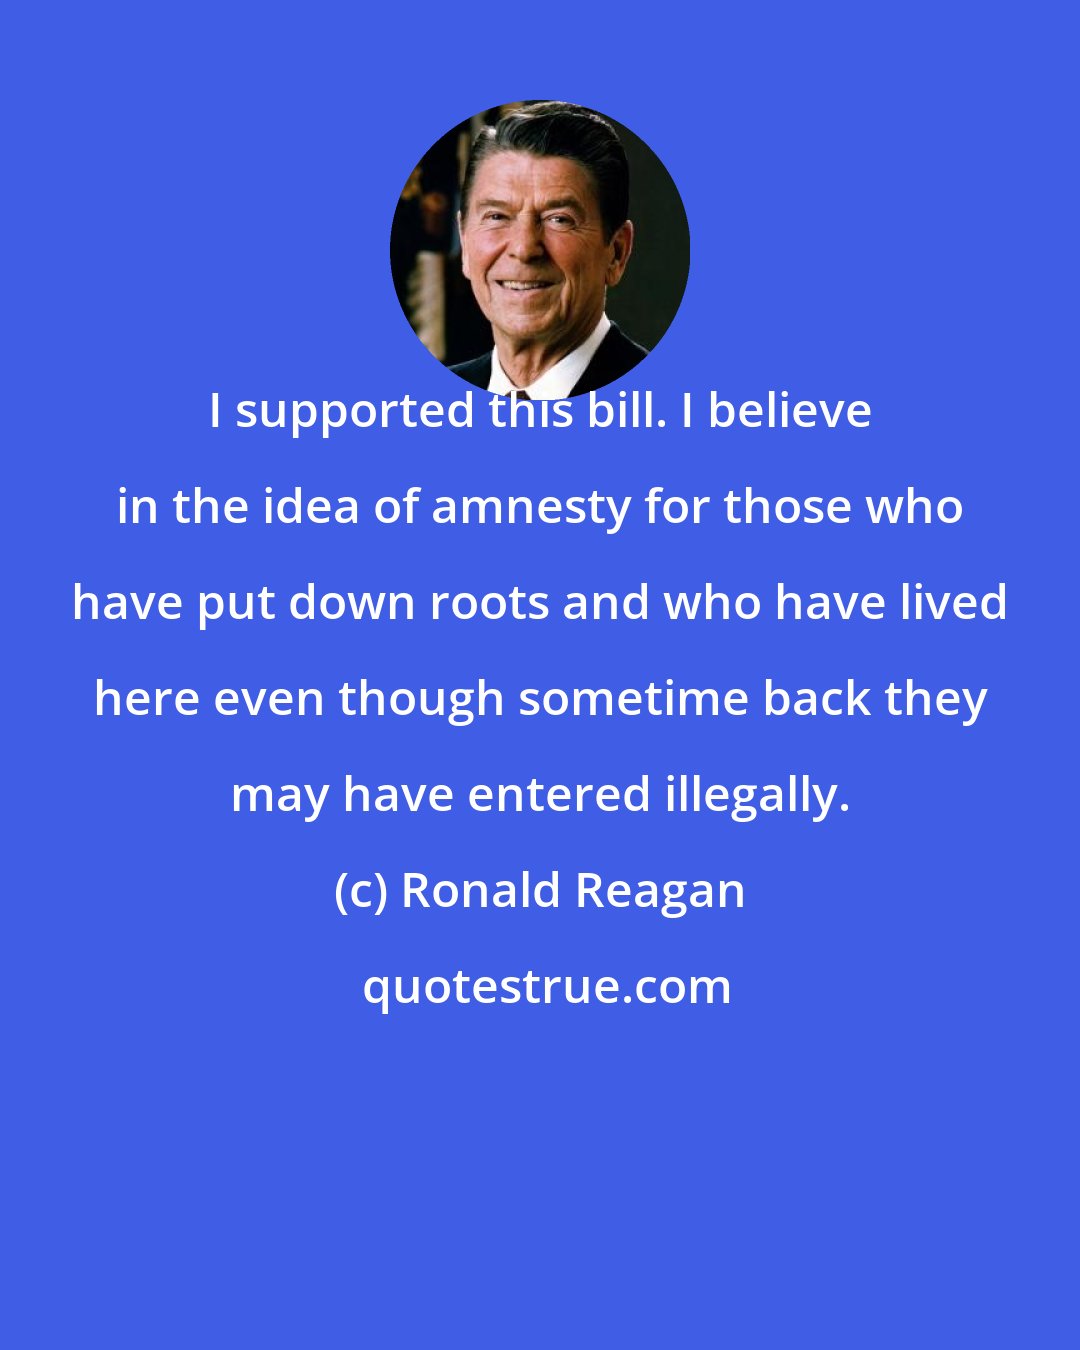 Ronald Reagan: I supported this bill. I believe in the idea of amnesty for those who have put down roots and who have lived here even though sometime back they may have entered illegally.